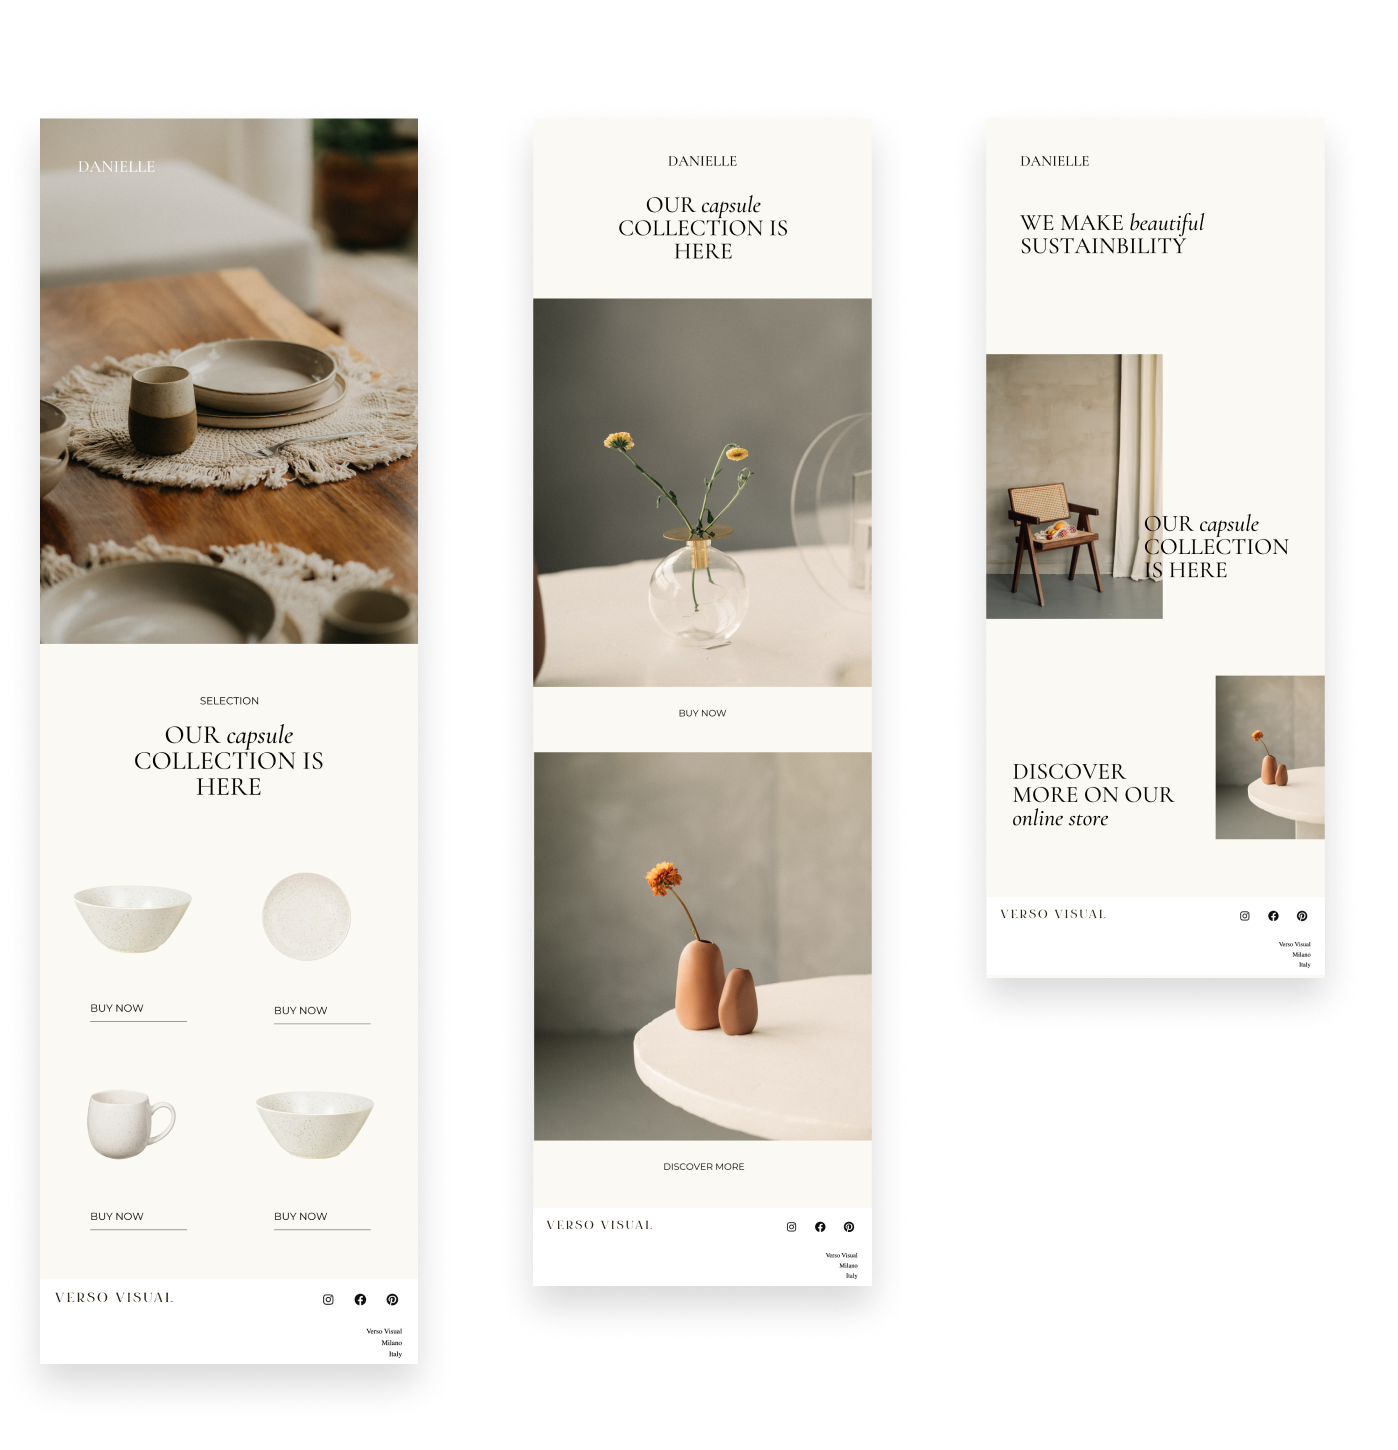 Danielle-Squarespace-Template-set-for-ecommerce-1.png